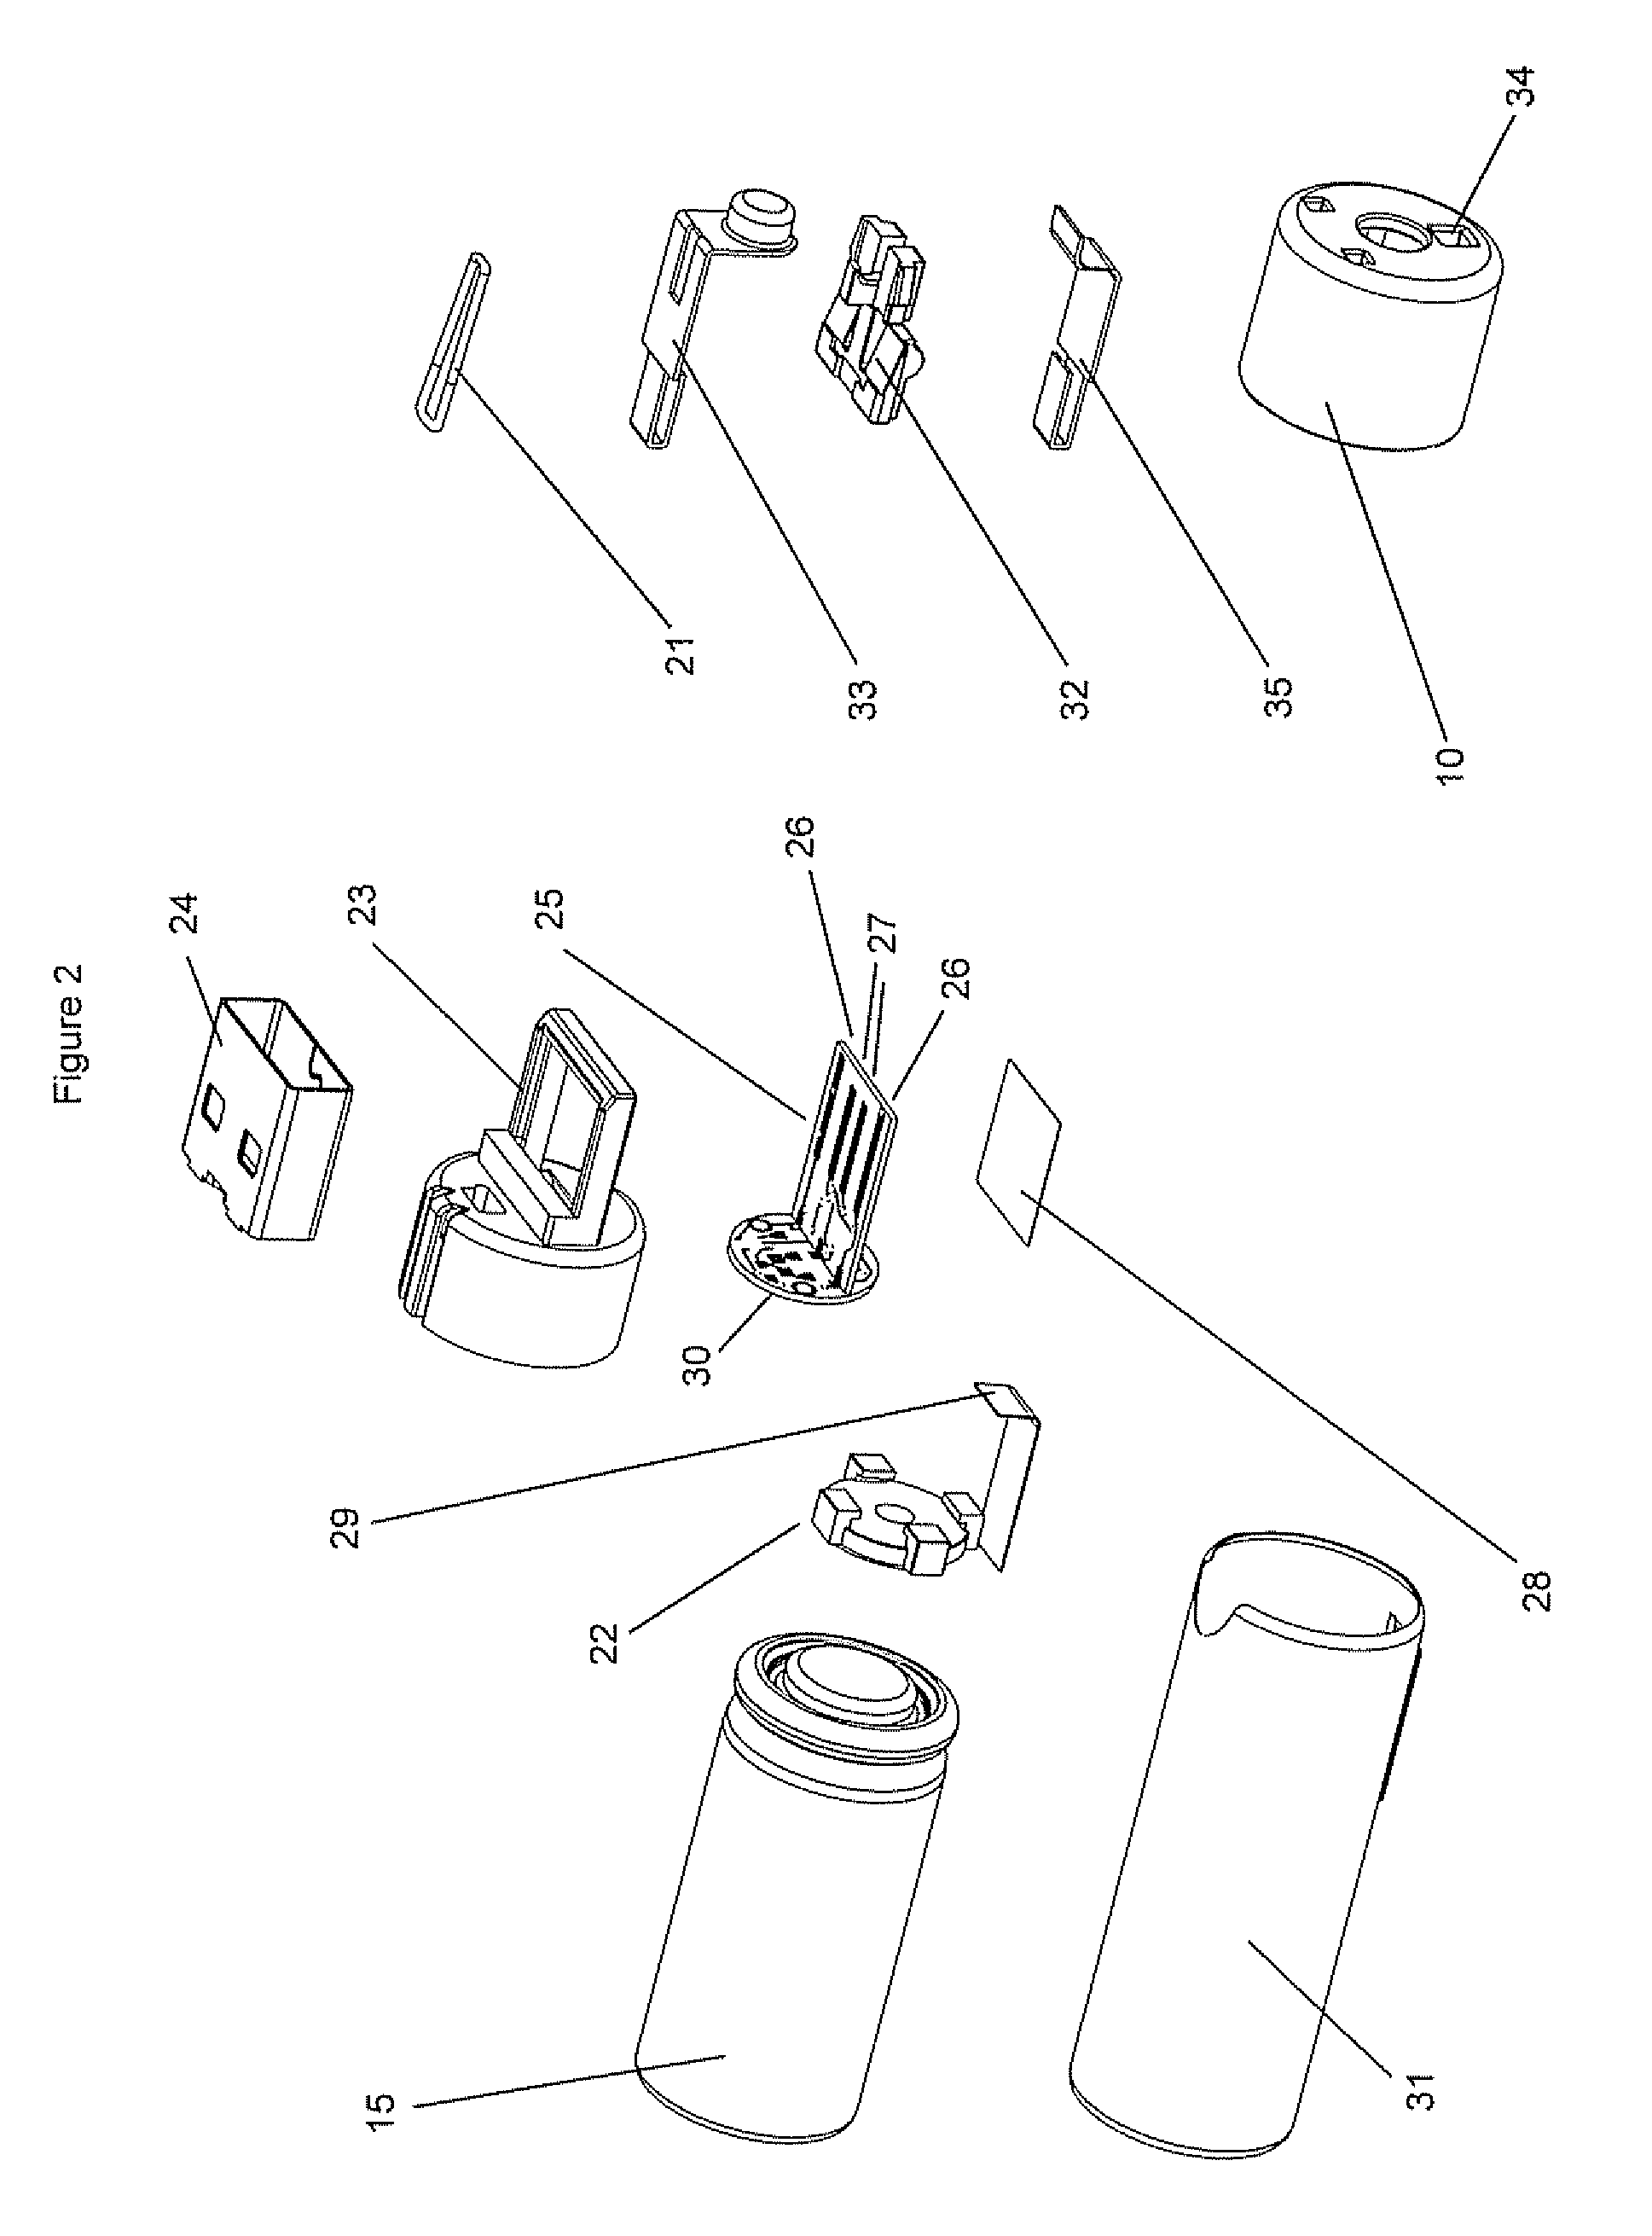 Rechargeable battery assembly with movable connector and power conversion circuitry